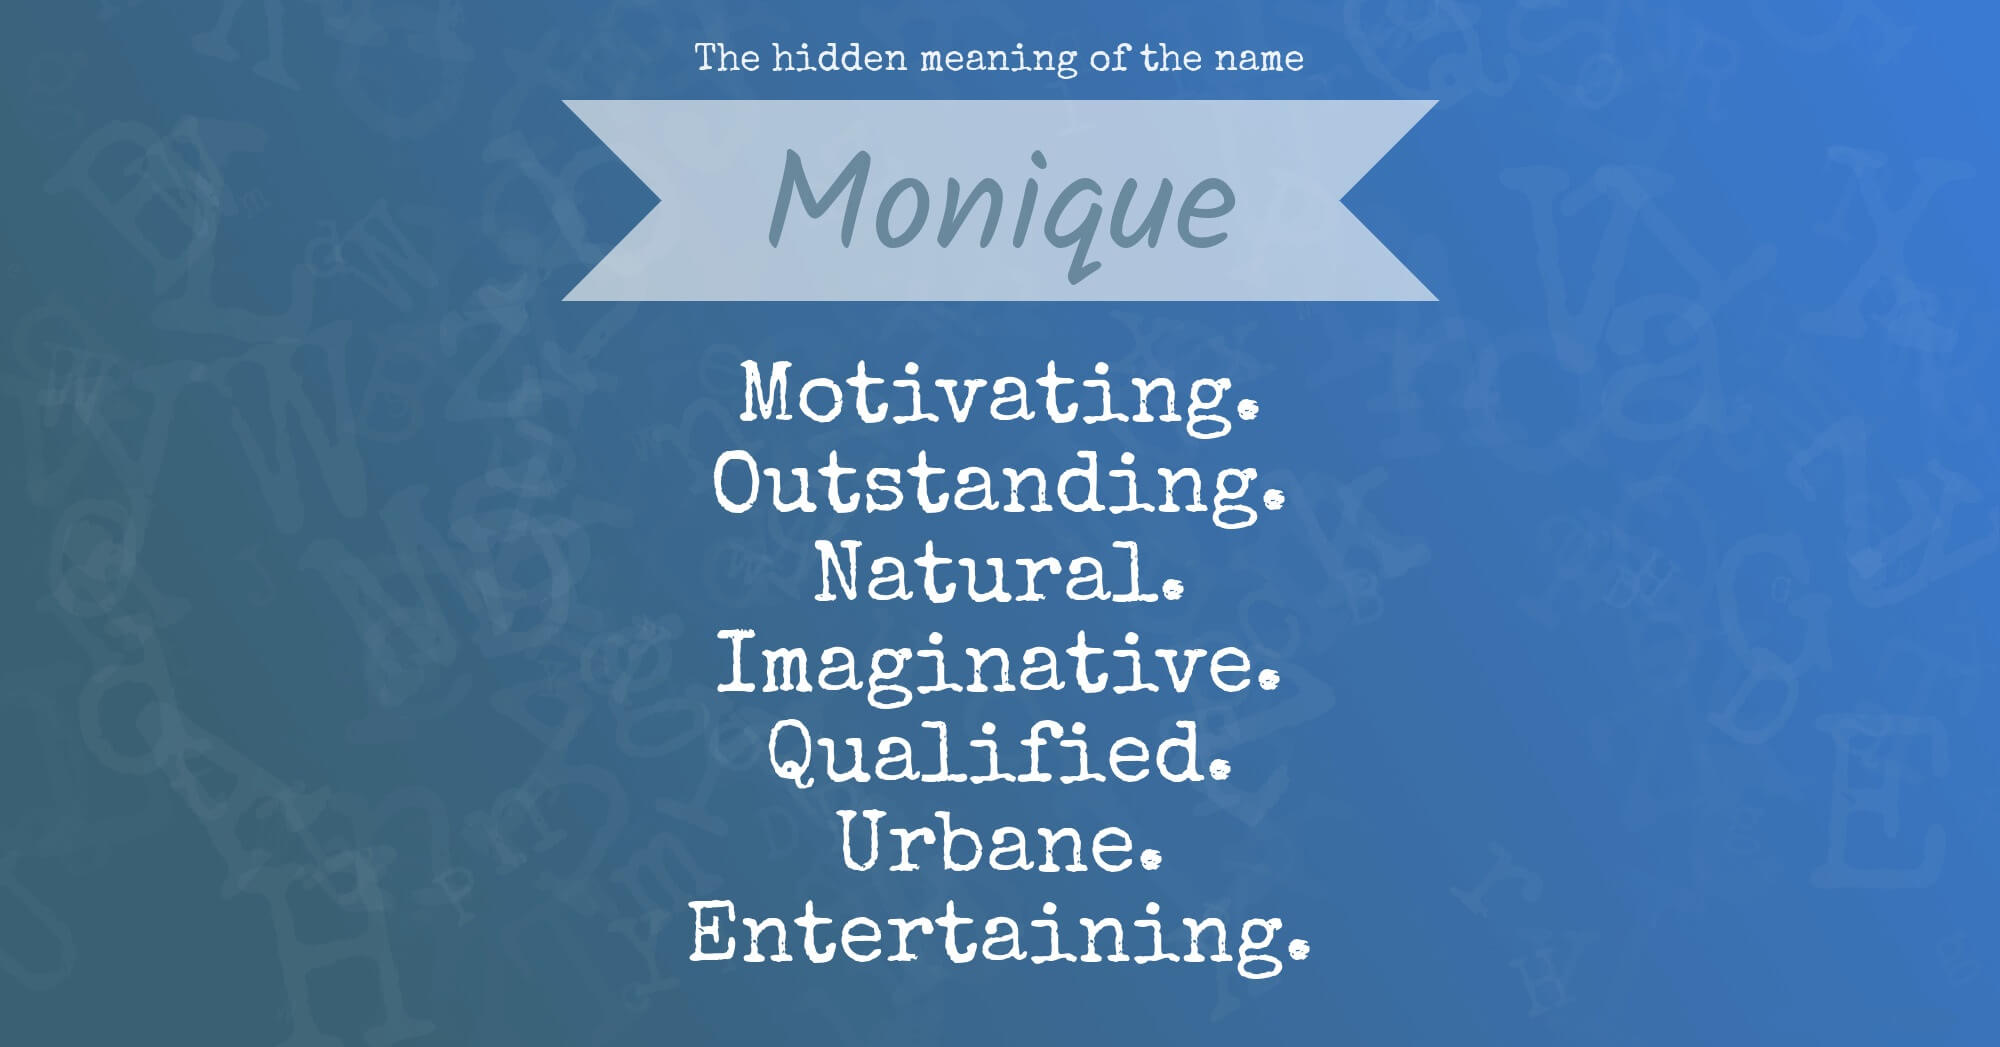 The Hidden Meaning Of The Name Monique